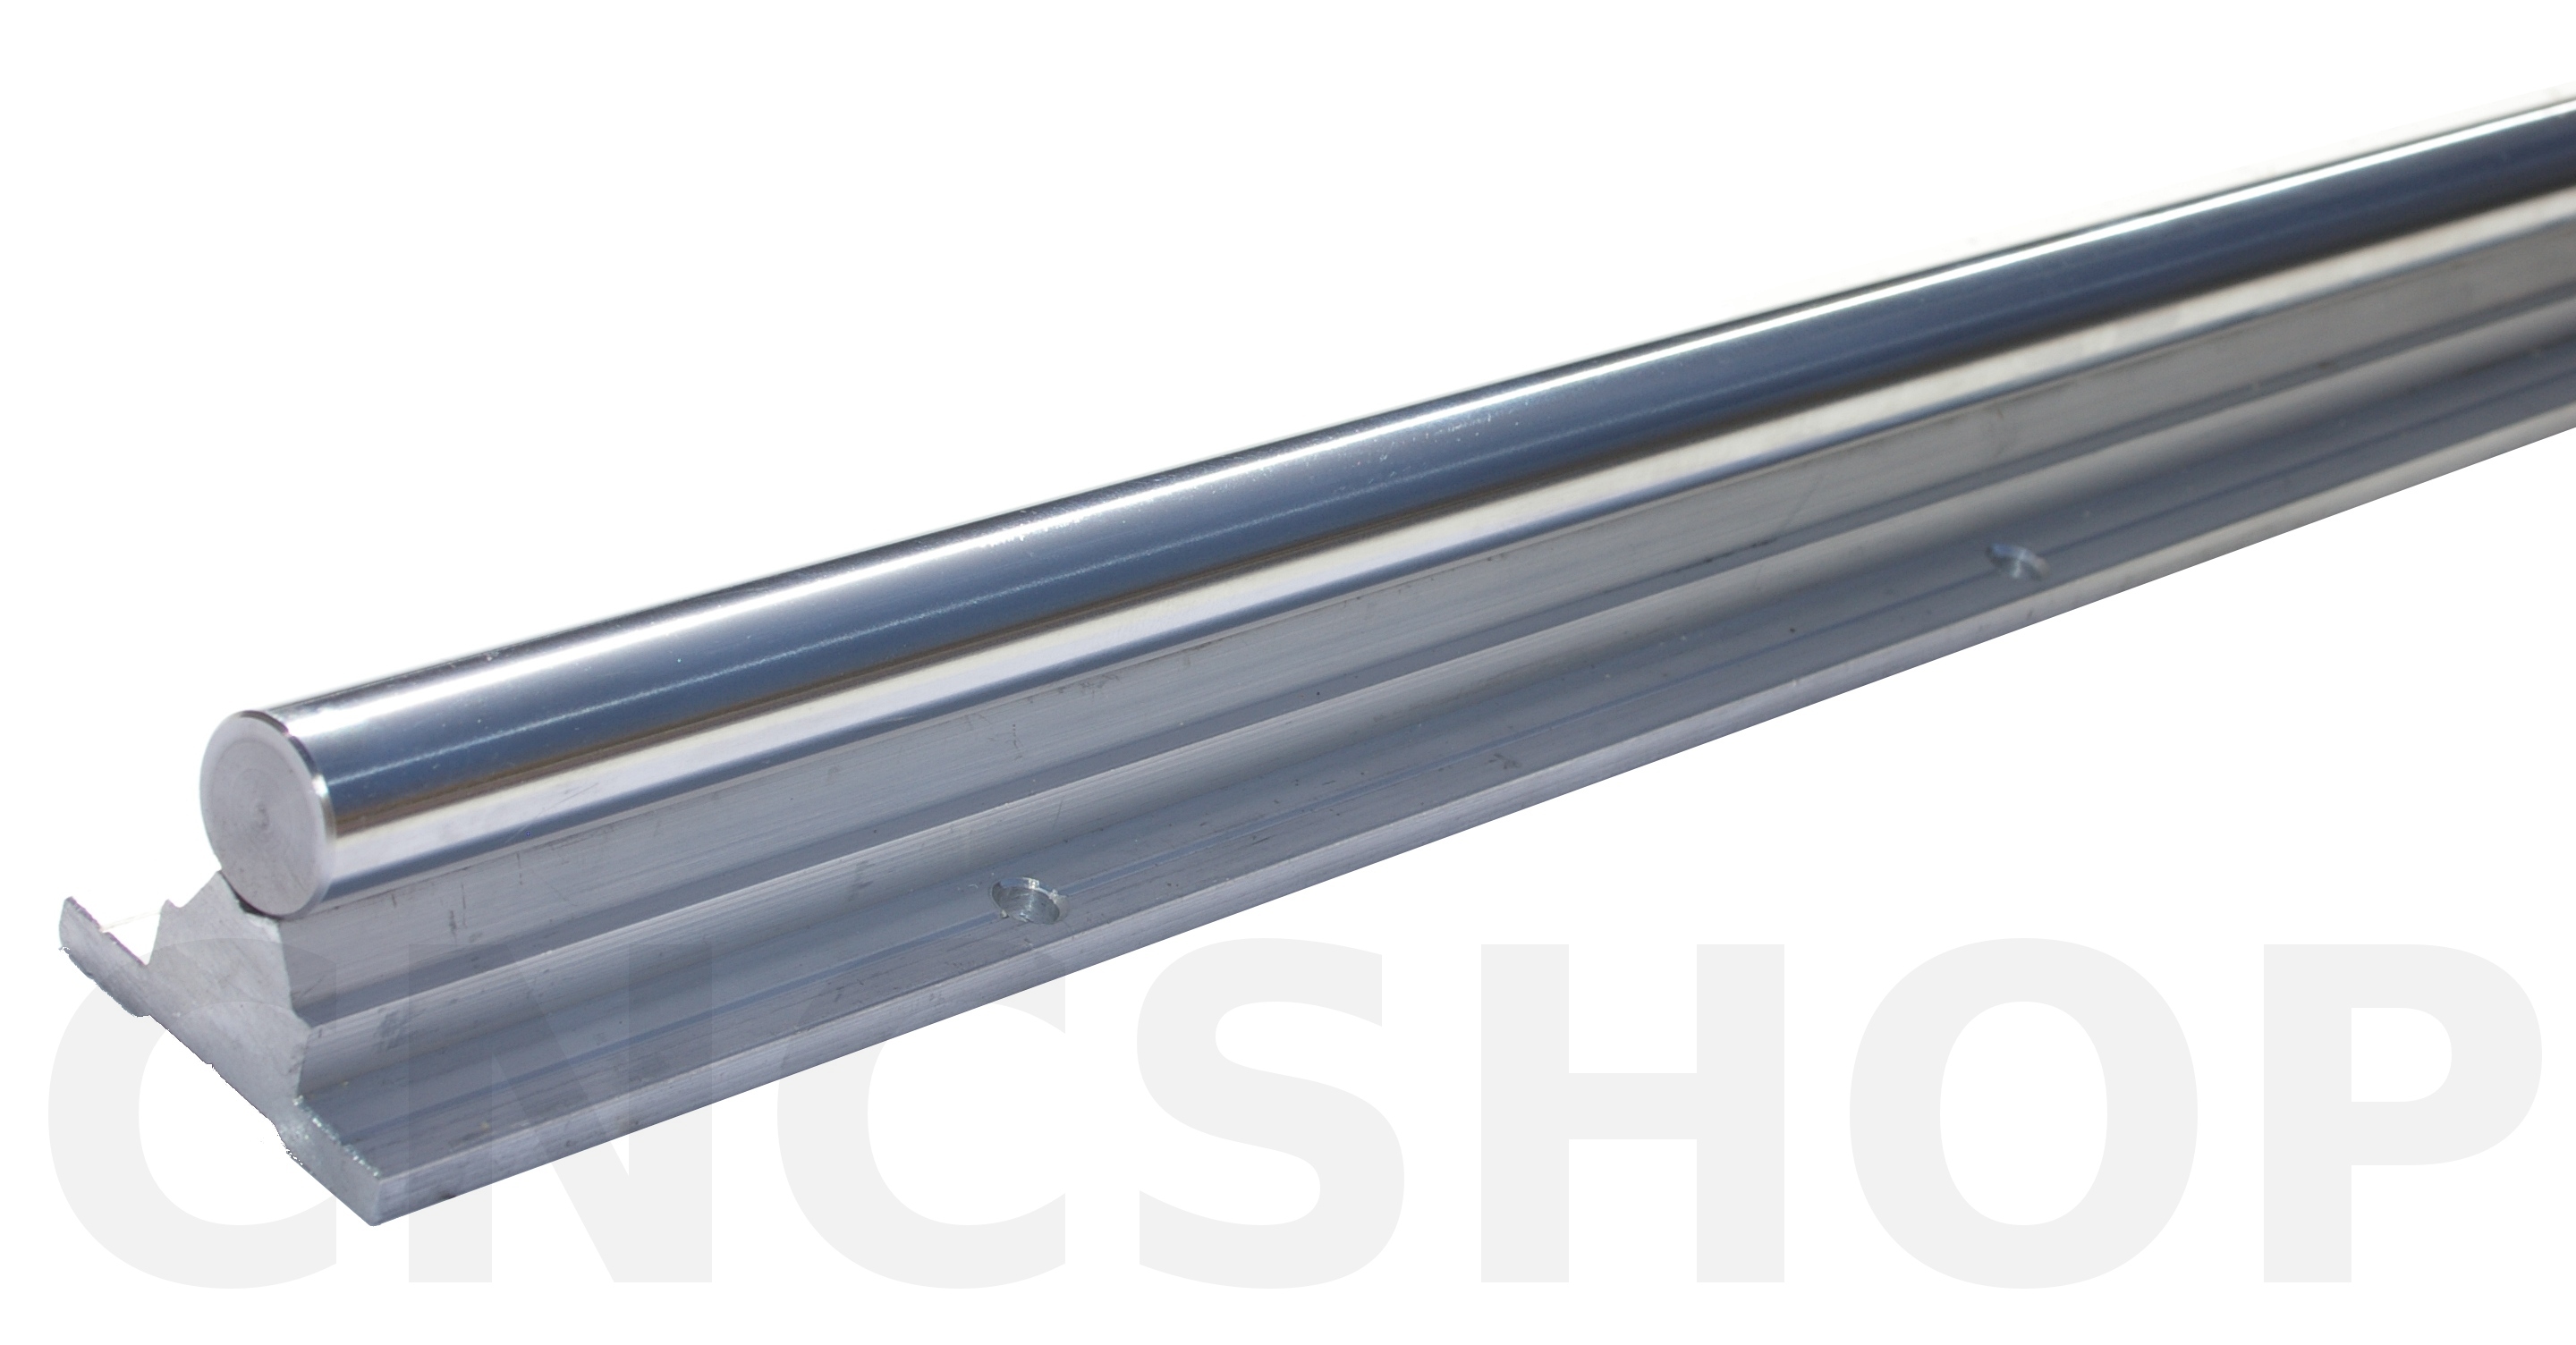 SBR16-300mm FULLY SUPPORTED LINEAR RAIL